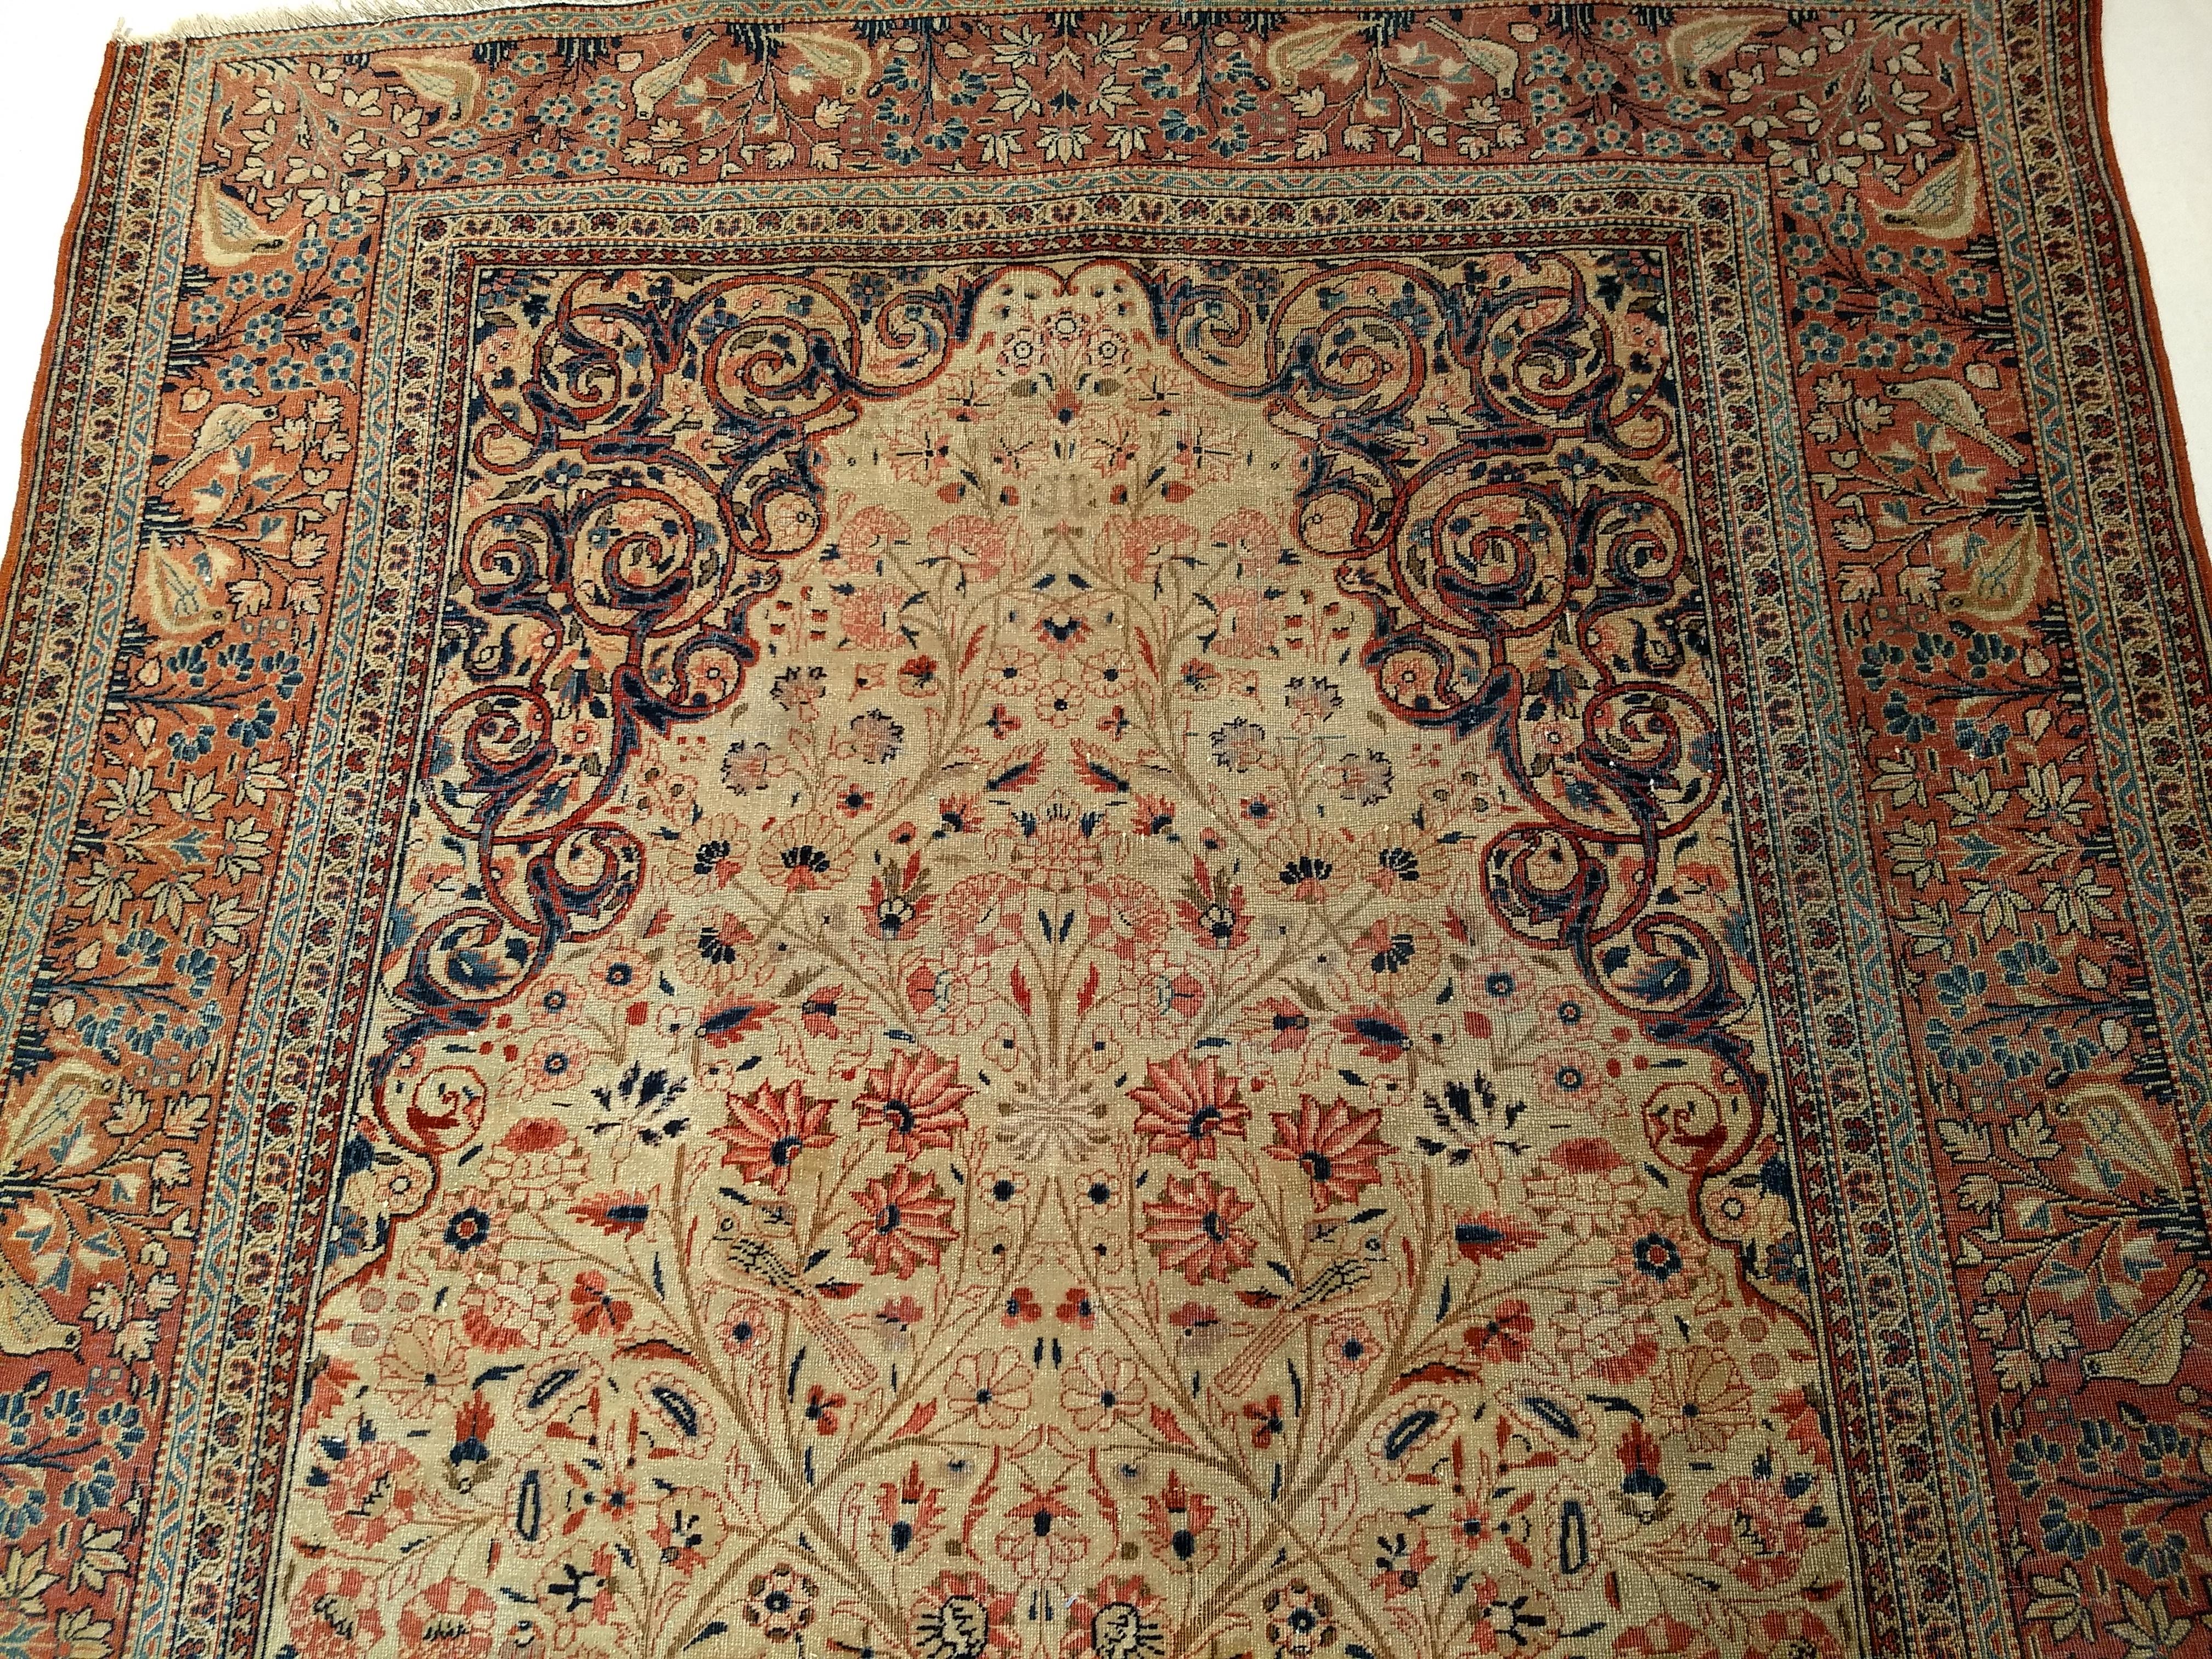 19th Century Persian Kashan “Tree of Life” Vase Rug in Ivory, Brick Red, Navy For Sale 2